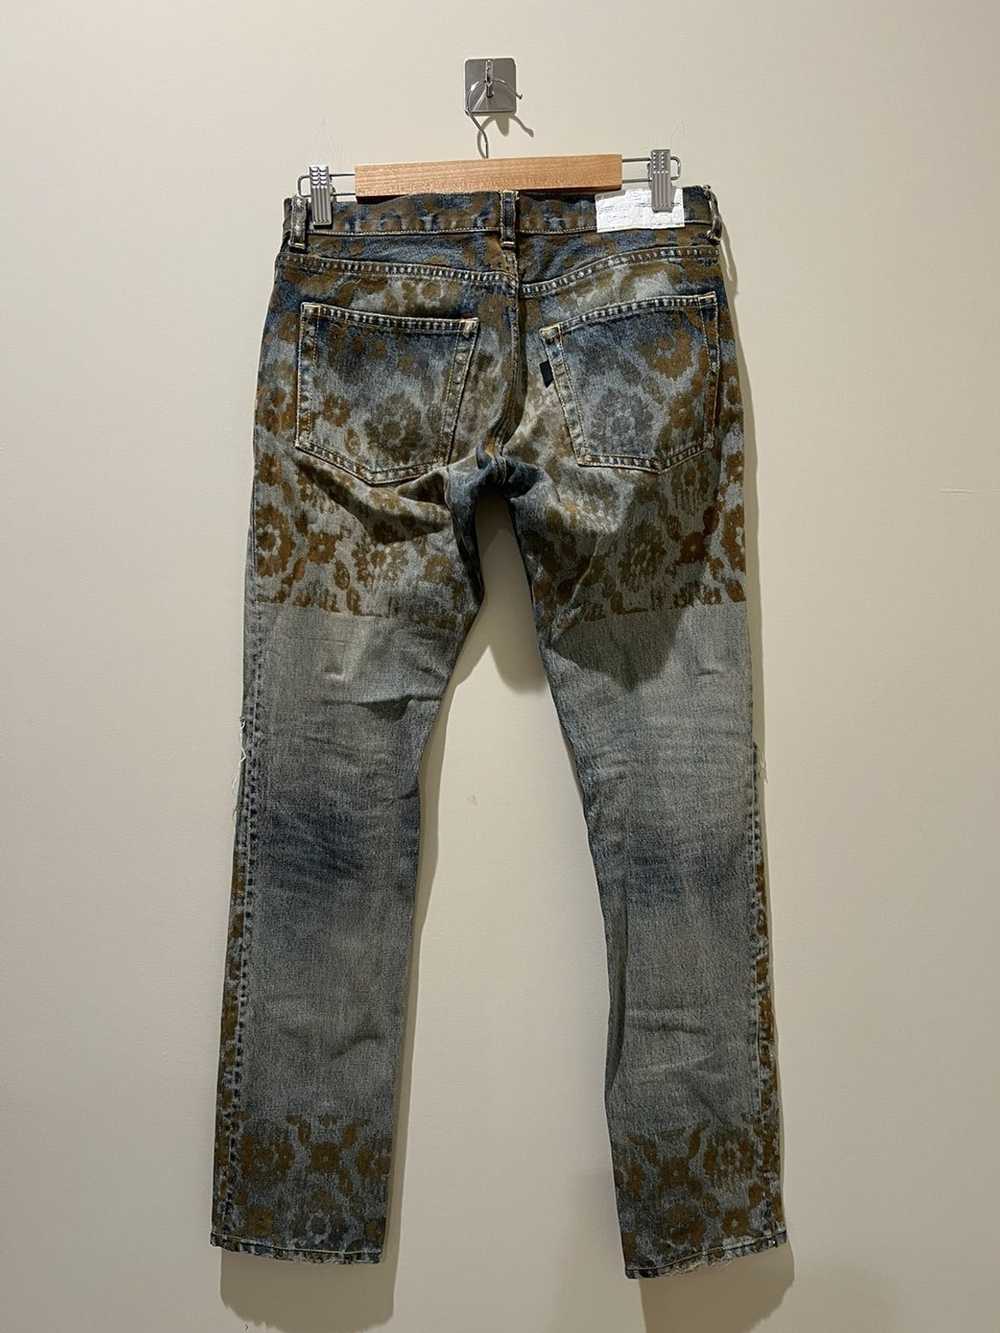 Undercover Undercover Printed Denim Jeans - image 2